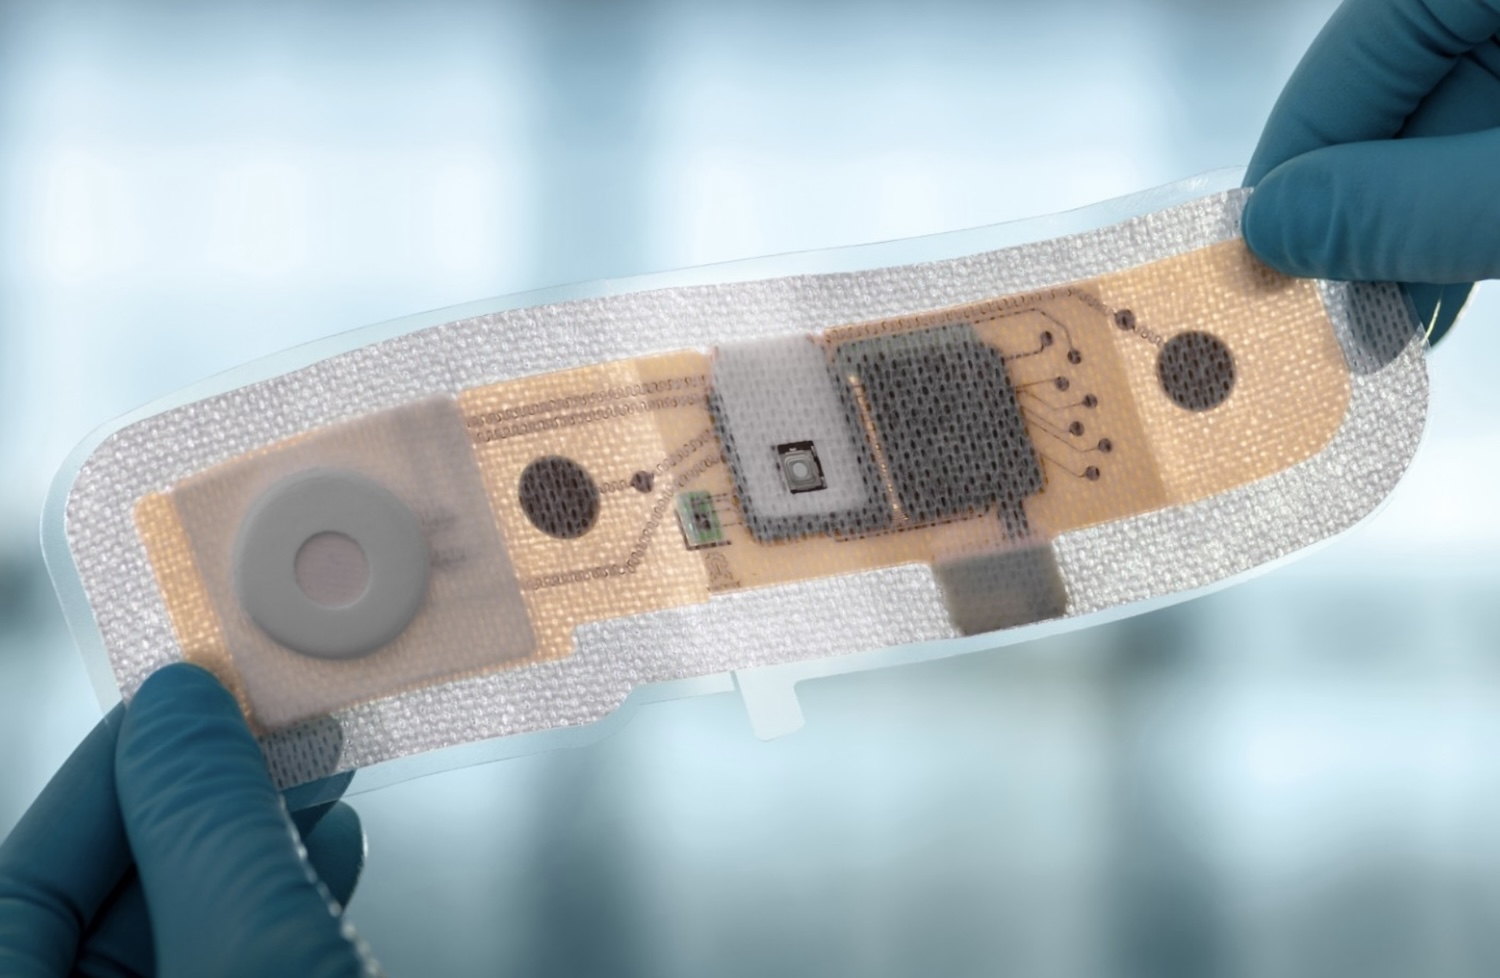 Fraunhofer IZM with project partners showcasing a stretchable wireless patch with electronics integrated into a textile substrate for medical monitoring of cardiac patients so that vital data such as oxygen saturation in the blood, chest movement and bio-impedance can be measured and transmitted directly to an app for monitoring by clinicians. © Fraunhofer IZM | Volker Mai